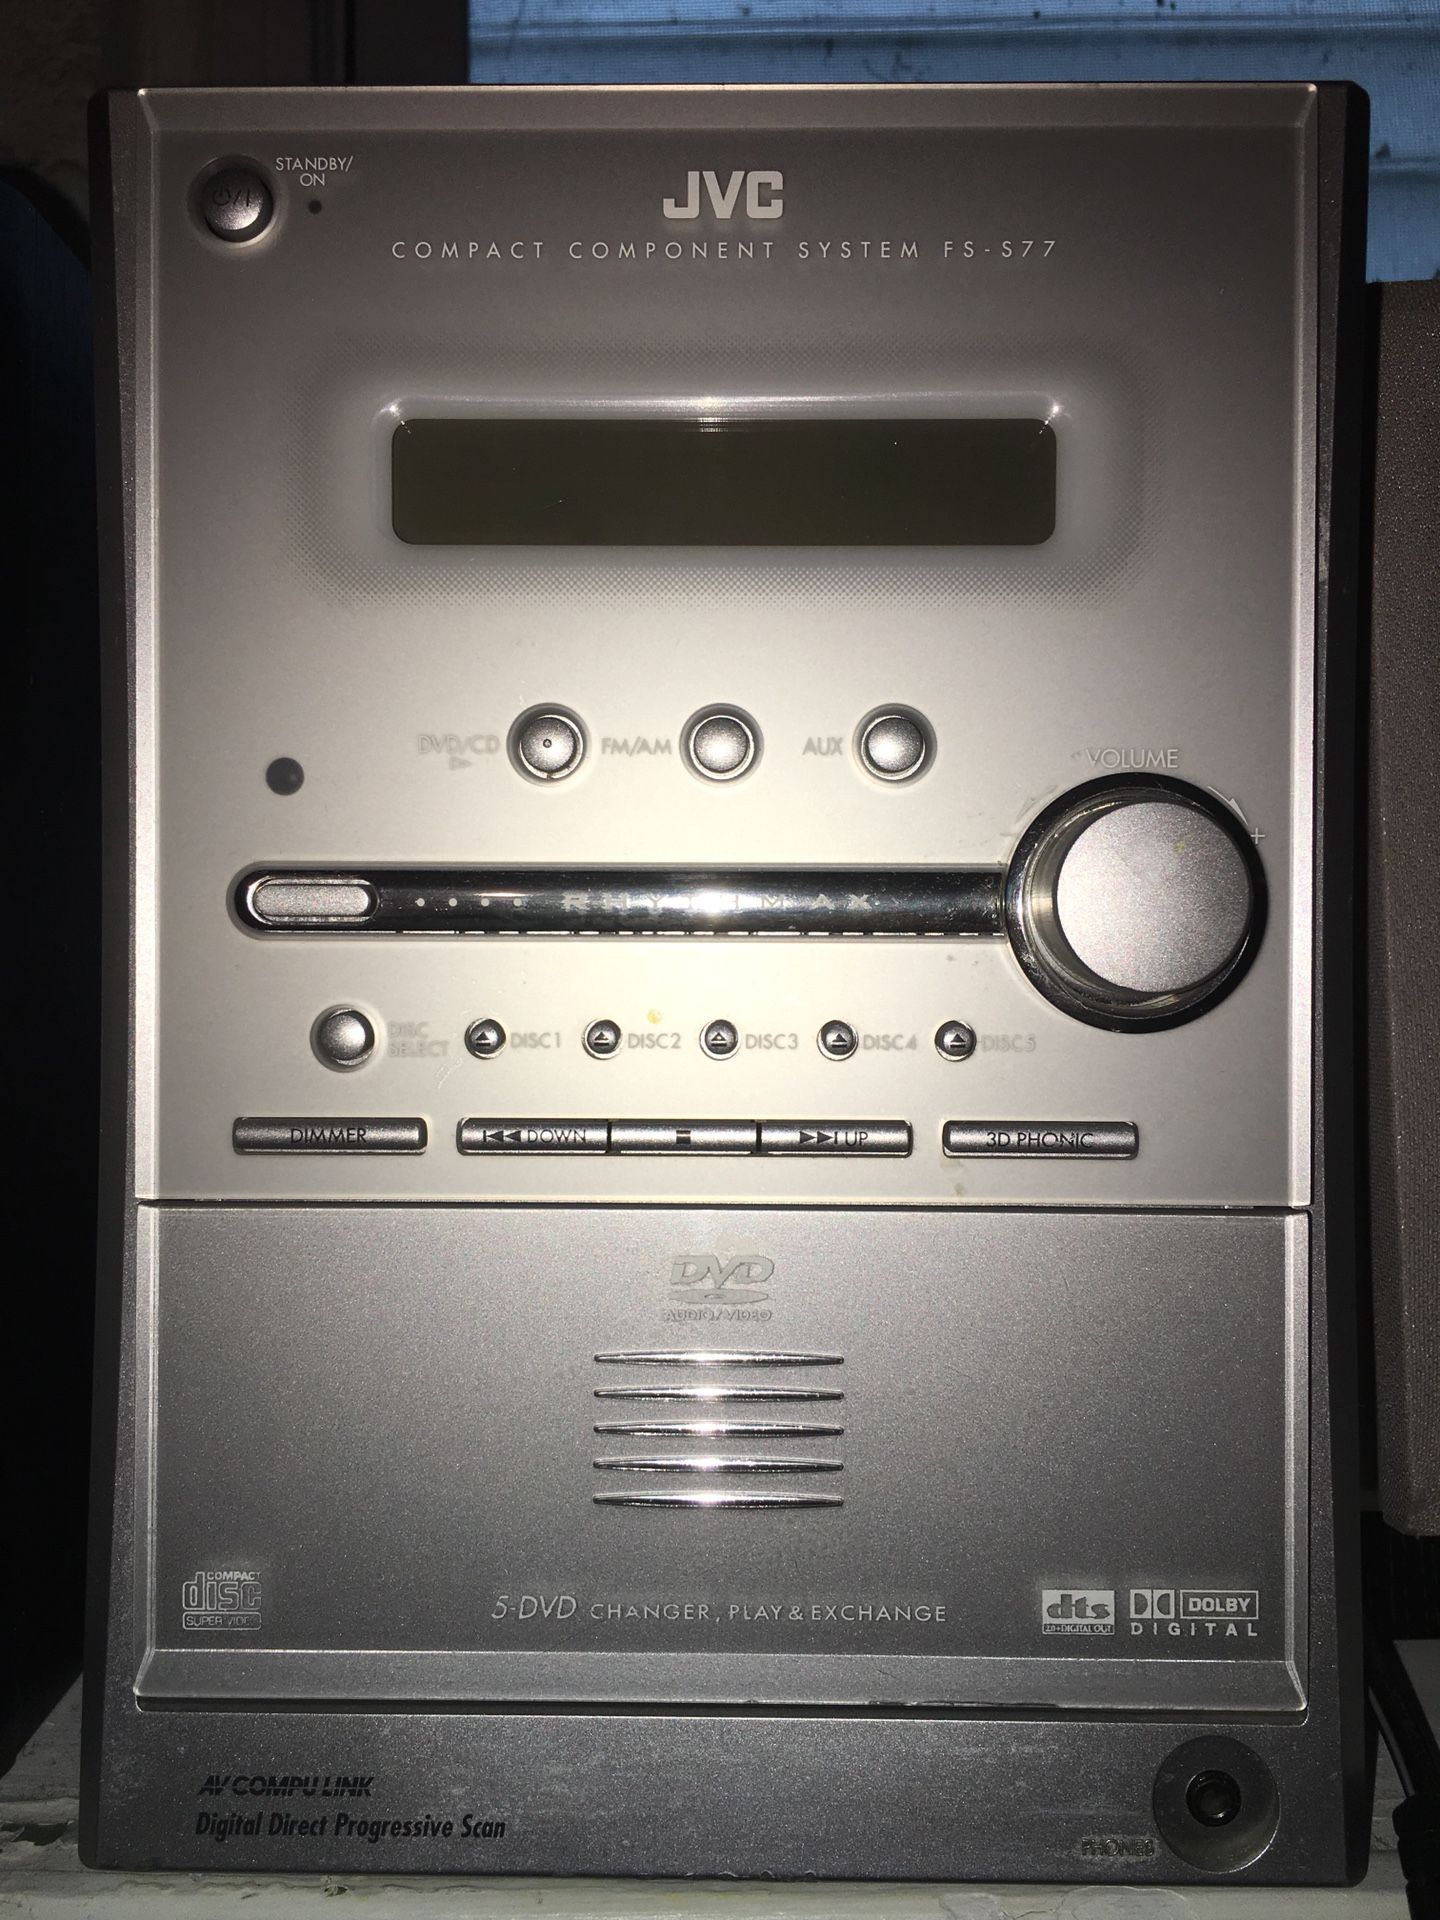 5 disk DVD, CD player and radio